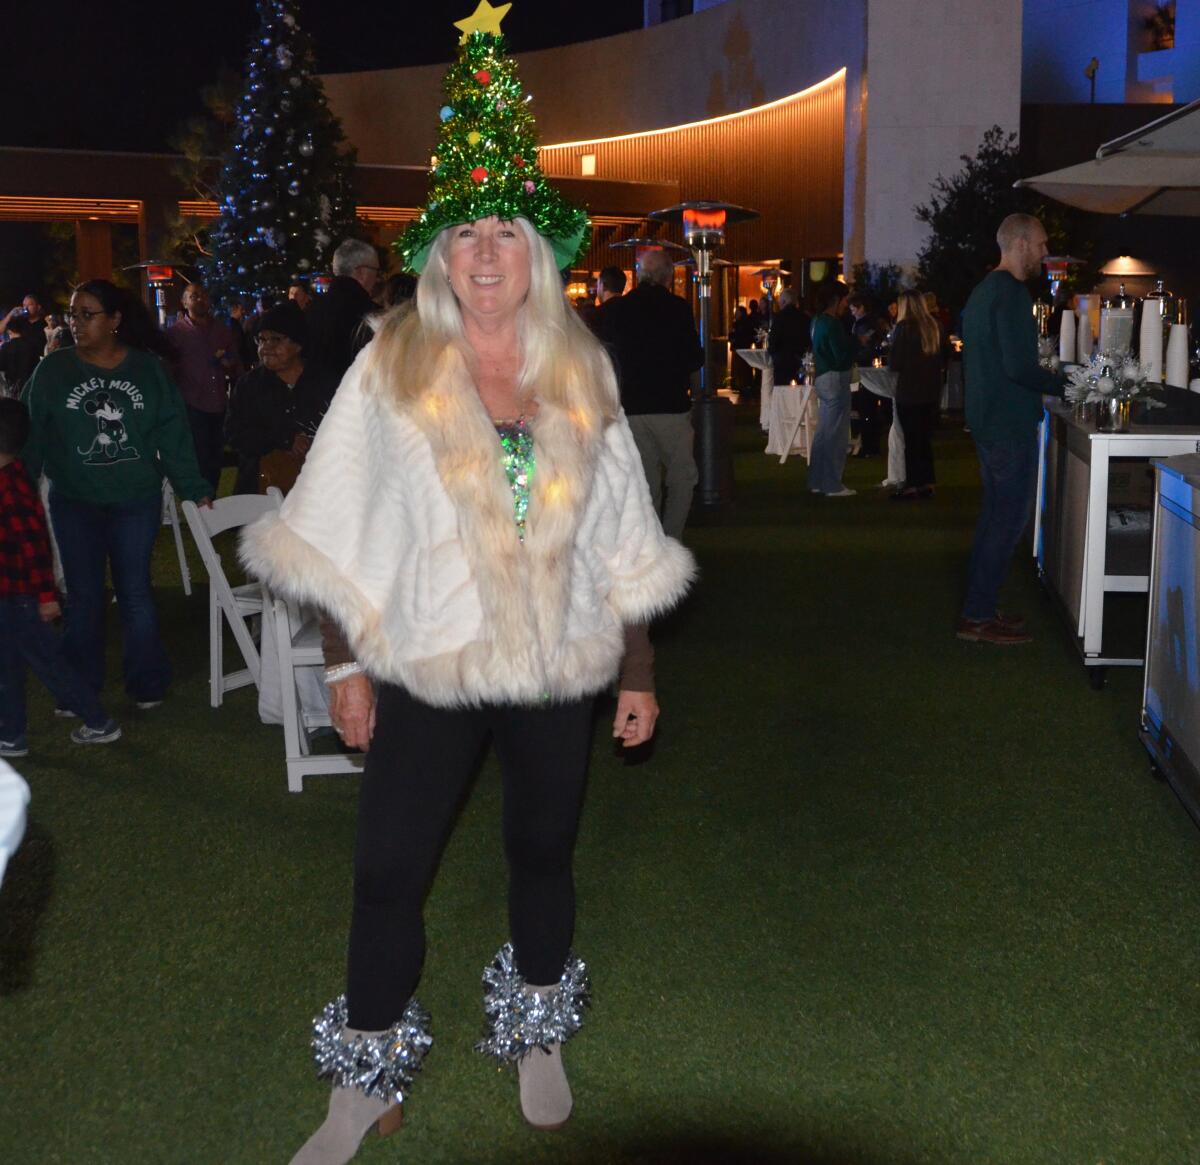 Christmas-costumed Kim Petty came from Sherman Oaks to attend VEA tree-lighting event.